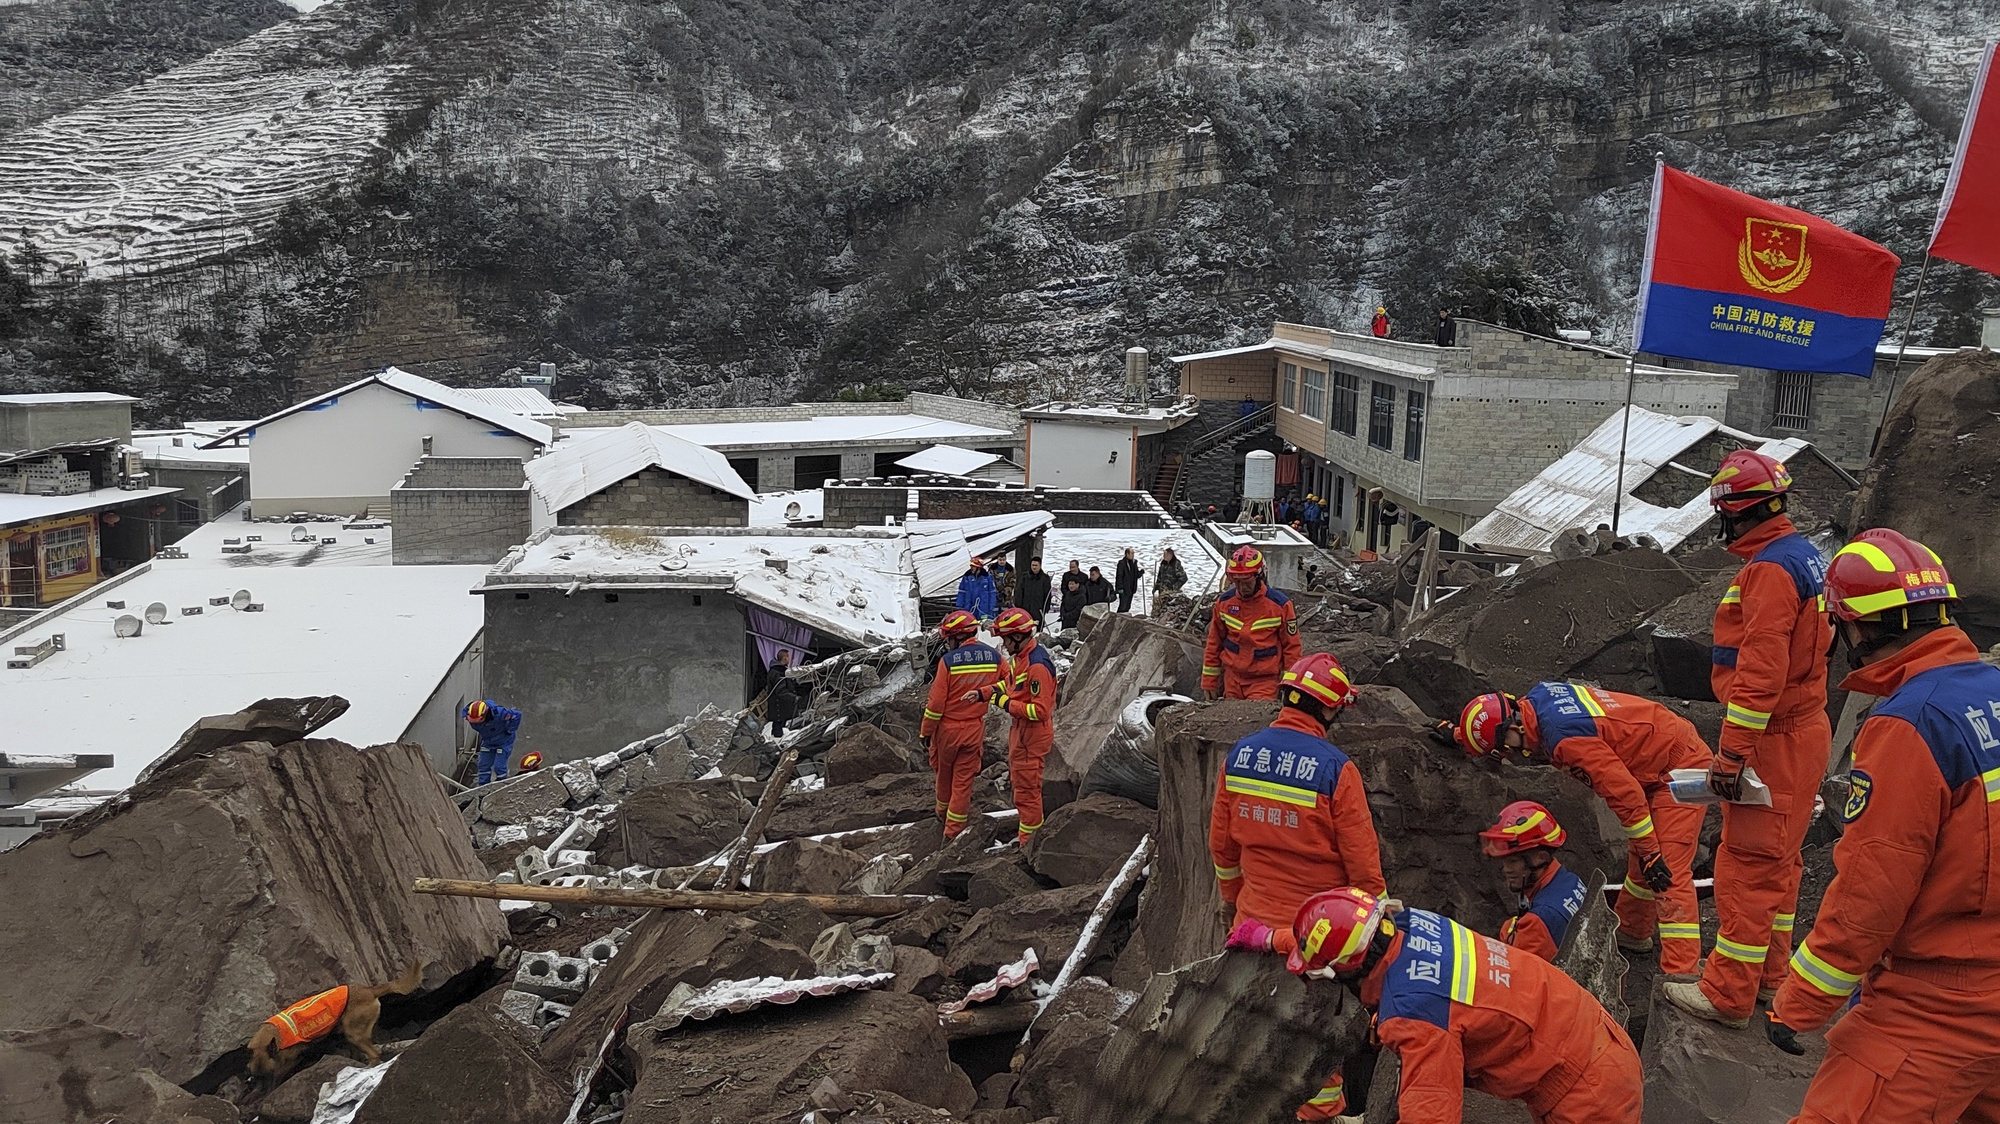 epa11095405 Rescuers work at the site of a landslide in Liangshui Village, Tangfang Town in the city of Zhaotong, Yunnan Province, China, 22 January 2024. A total of 47 people were buried in a landslide that struck southwest China&#039;s Yunnan Province early 22 January. More than 200 rescuers together with 33 firefighting vehicles and 10 loading machines were combing the debris to search for the missing, after the disaster happened in Liangshui Village, Tangfang Town in the city of Zhaotong at 5:51 a.m. on 22 January. The buried villagers were from 18 households, according to the headquarters for the disaster relief. More than 200 residents were evacuated as the provincial commission for disaster reduction activated a Level-III emergency response for disaster relief.  EPA/XINHUA / ZHOU LEI CHINA OUT / UK AND IRELAND OUT  /       MANDATORY CREDIT  EDITORIAL USE ONLY  EDITORIAL USE ONLY